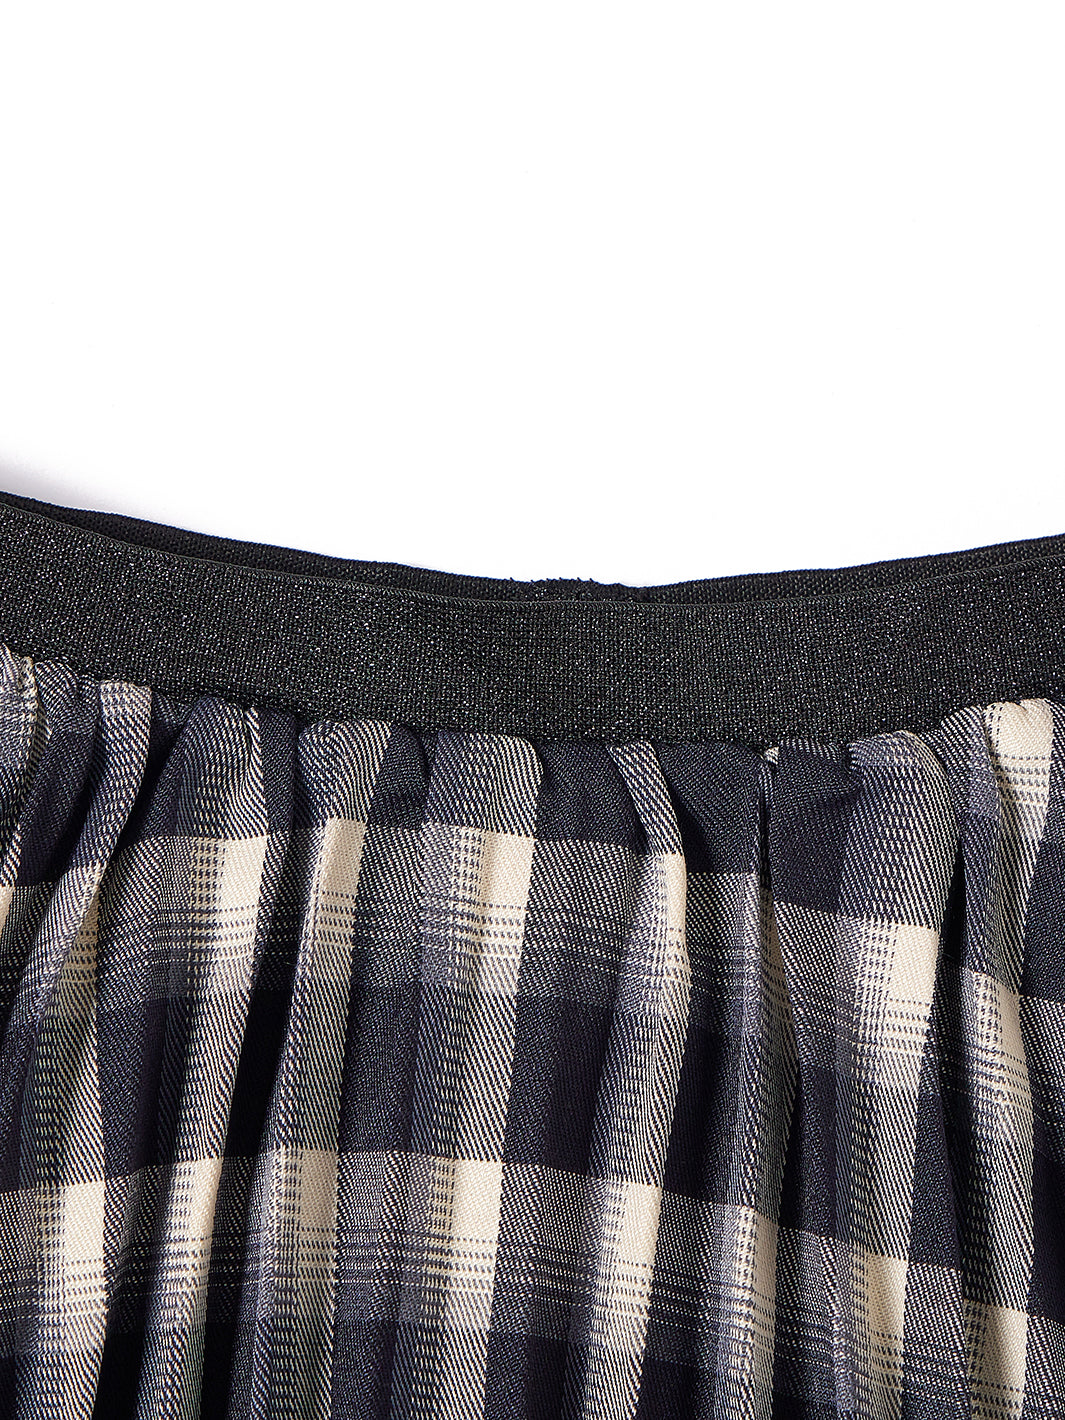 Checked Accordion Pleated Skirt